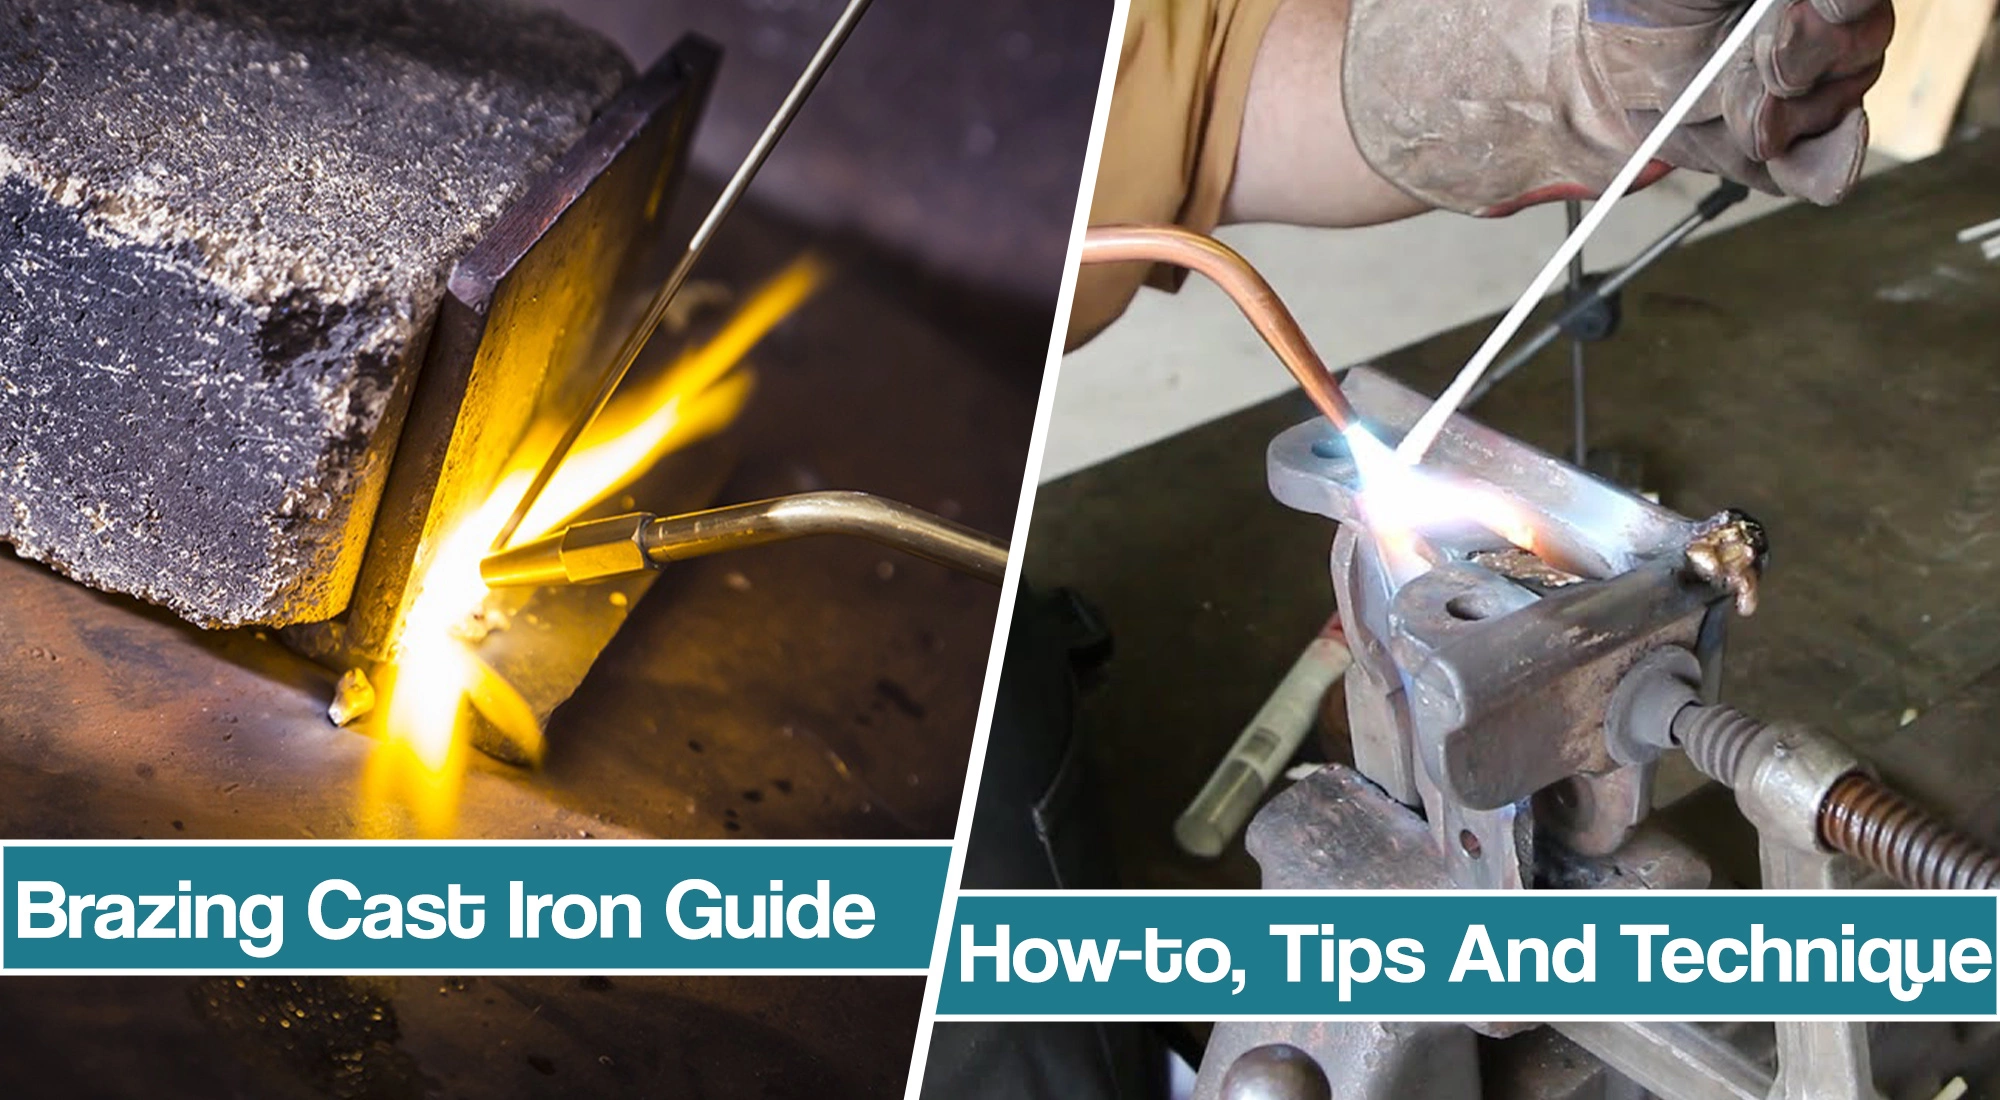 Brazing cast iron – How-To Guide, Tips & Techniques